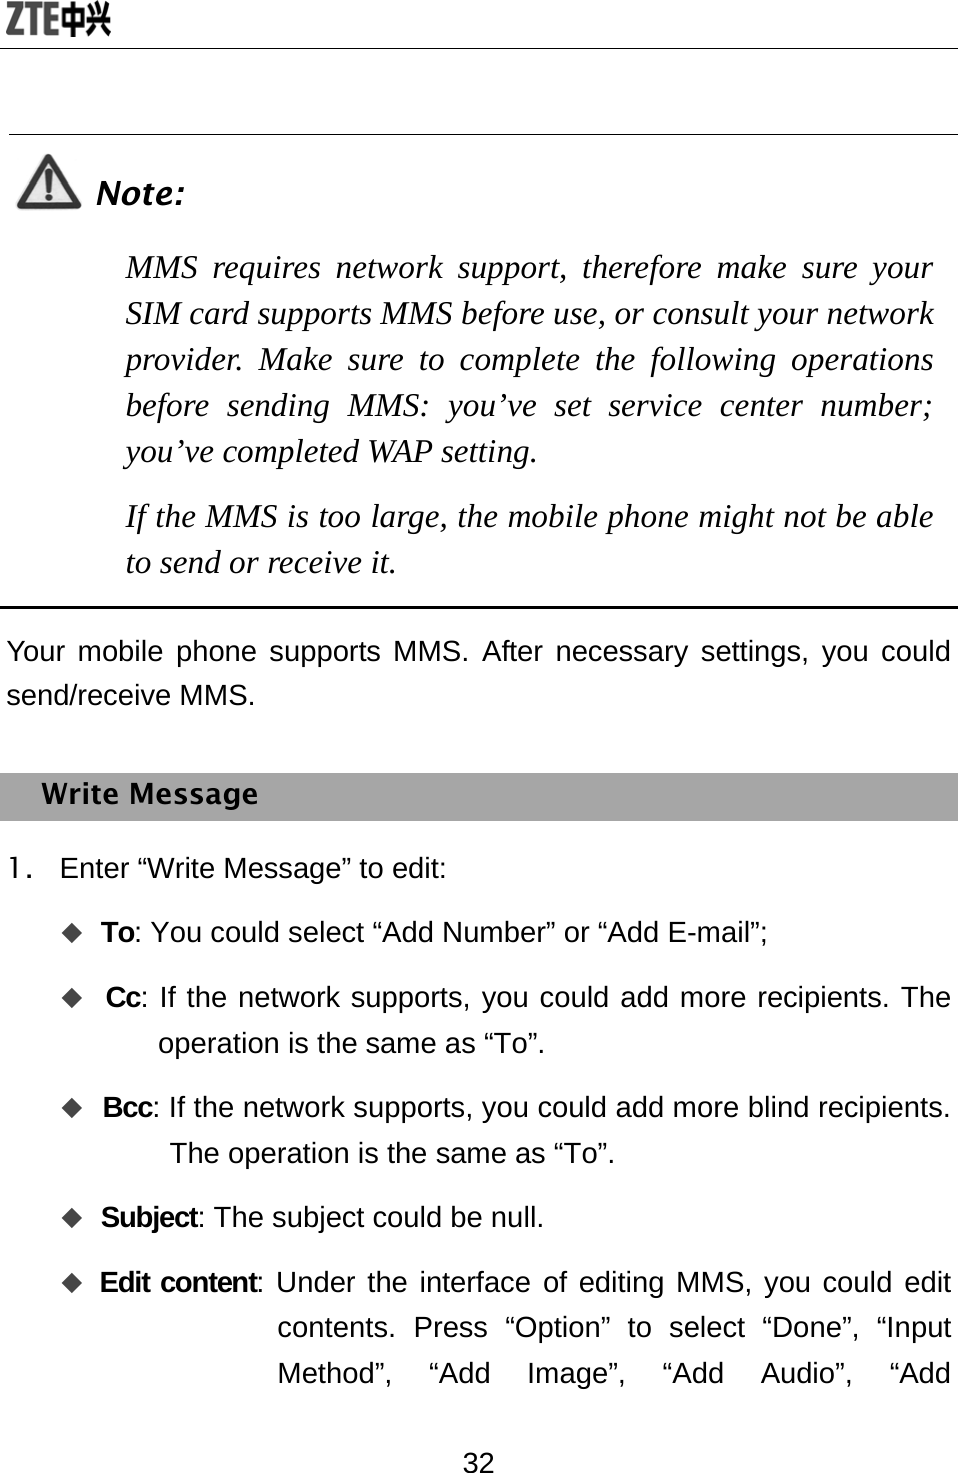  32  Note: MMS requires network support, therefore make sure your SIM card supports MMS before use, or consult your network provider. Make sure to complete the following operations before sending MMS: you’ve set service center number; you’ve completed WAP setting. If the MMS is too large, the mobile phone might not be able to send or receive it.  Your mobile phone supports MMS. After necessary settings, you could send/receive MMS. Write Message 1.  Enter “Write Message” to edit:  To: You could select “Add Number” or “Add E-mail”;  Cc: If the network supports, you could add more recipients. The operation is the same as “To”.  Bcc: If the network supports, you could add more blind recipients. The operation is the same as “To”.  Subject: The subject could be null.    Edit content: Under the interface of editing MMS, you could edit contents. Press “Option” to select “Done”, “Input Method”, “Add Image”, “Add Audio”, “Add 